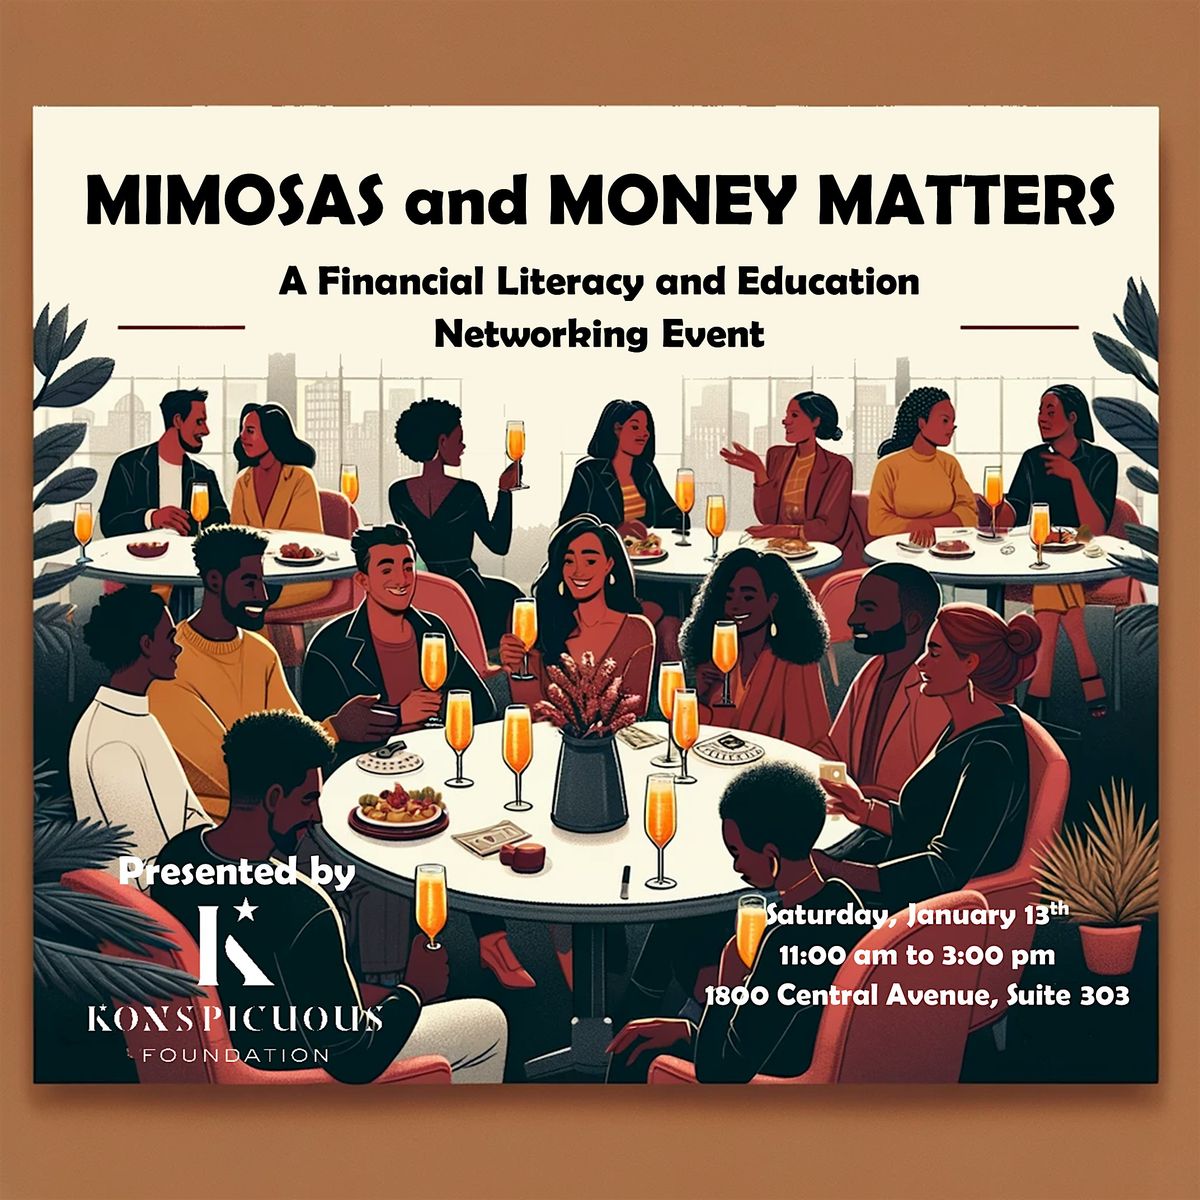 Mimosas and Money Matters